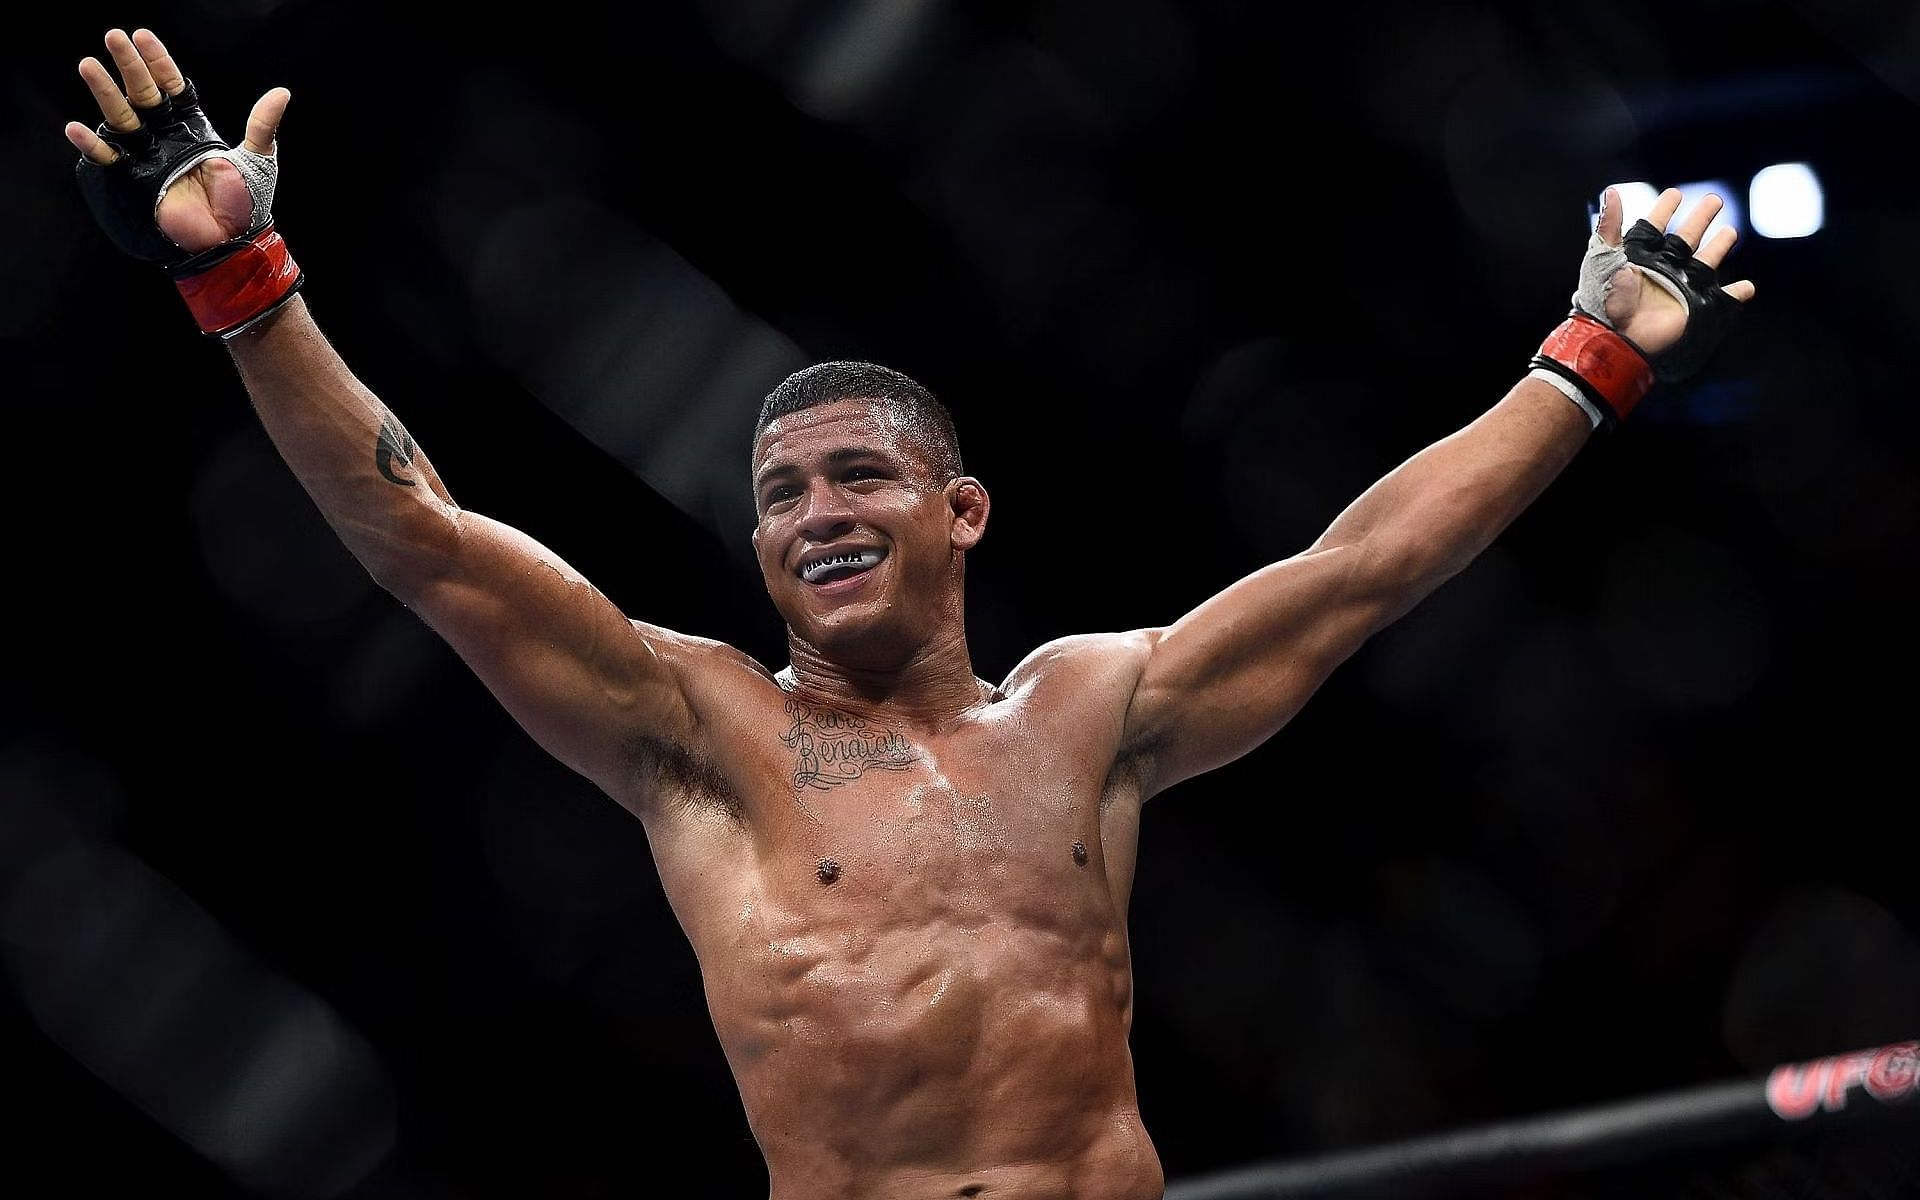 Gilbert Burns produced one of the best finishes at UFC 283